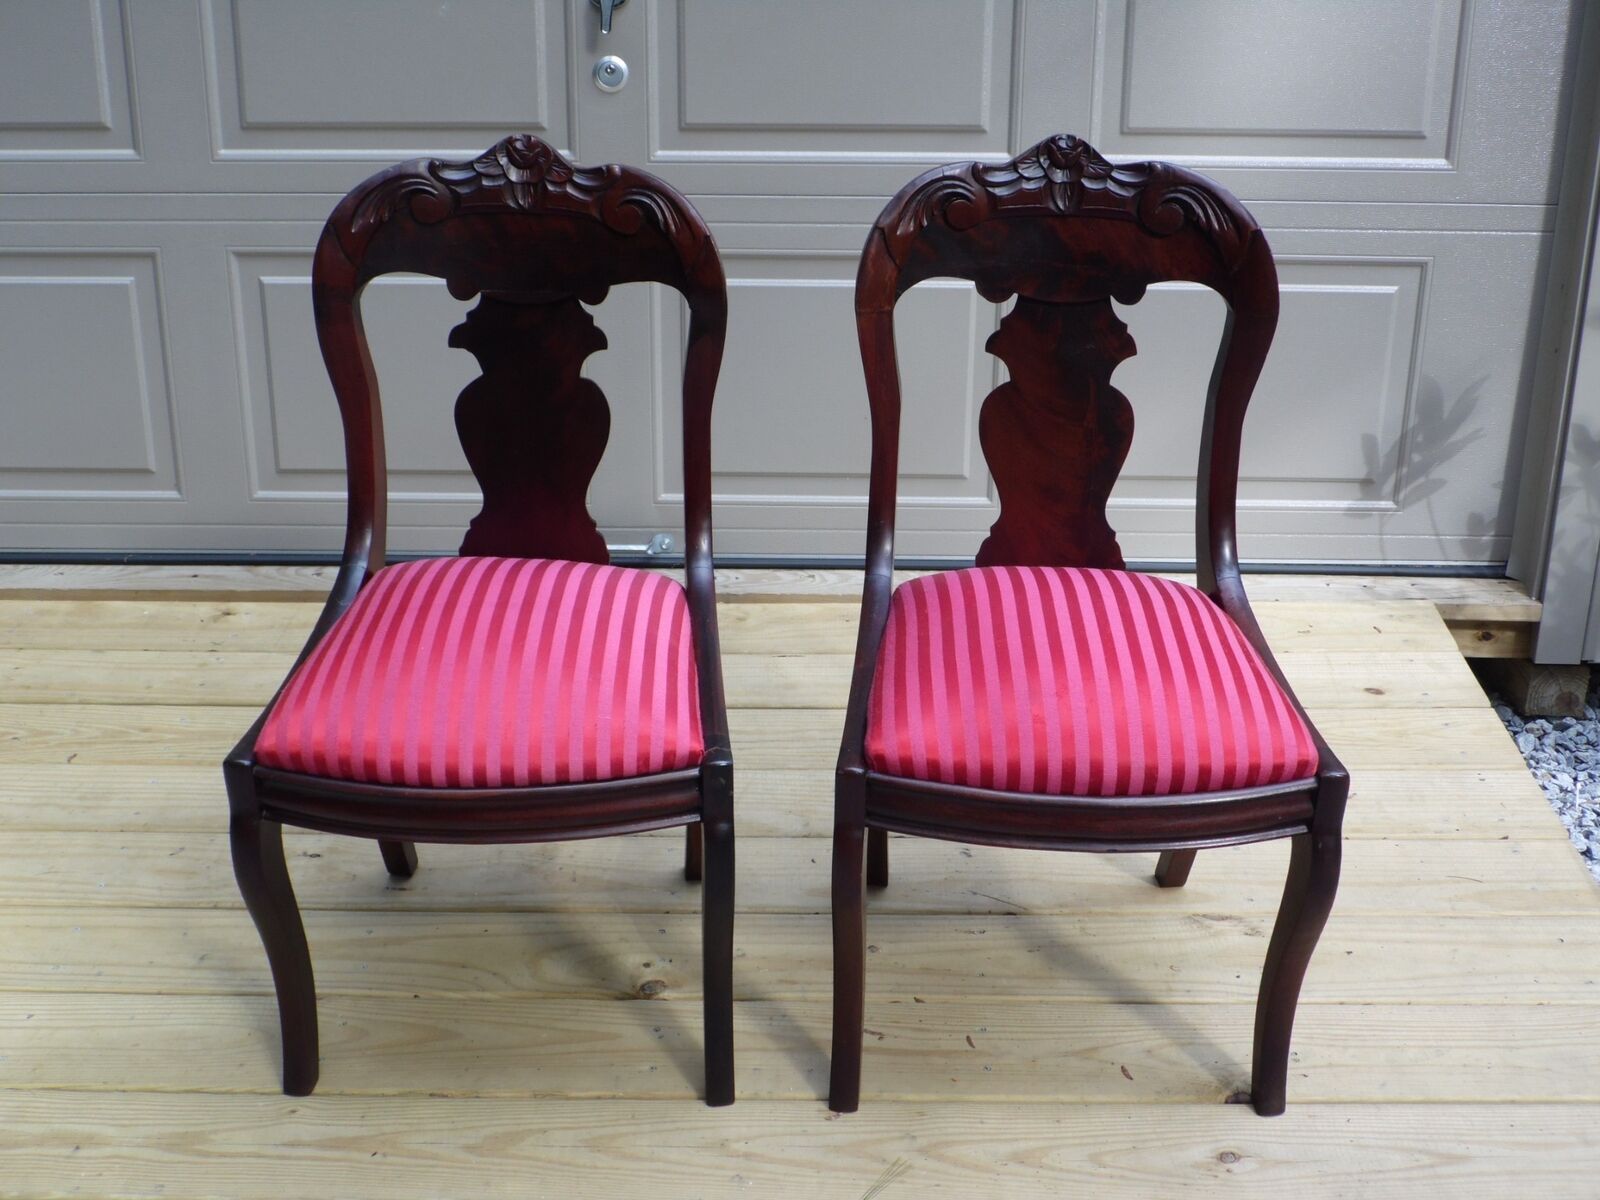 Antique Pair Hand Carved Flame Mahogany American Empire Dining Chairs 19th c.